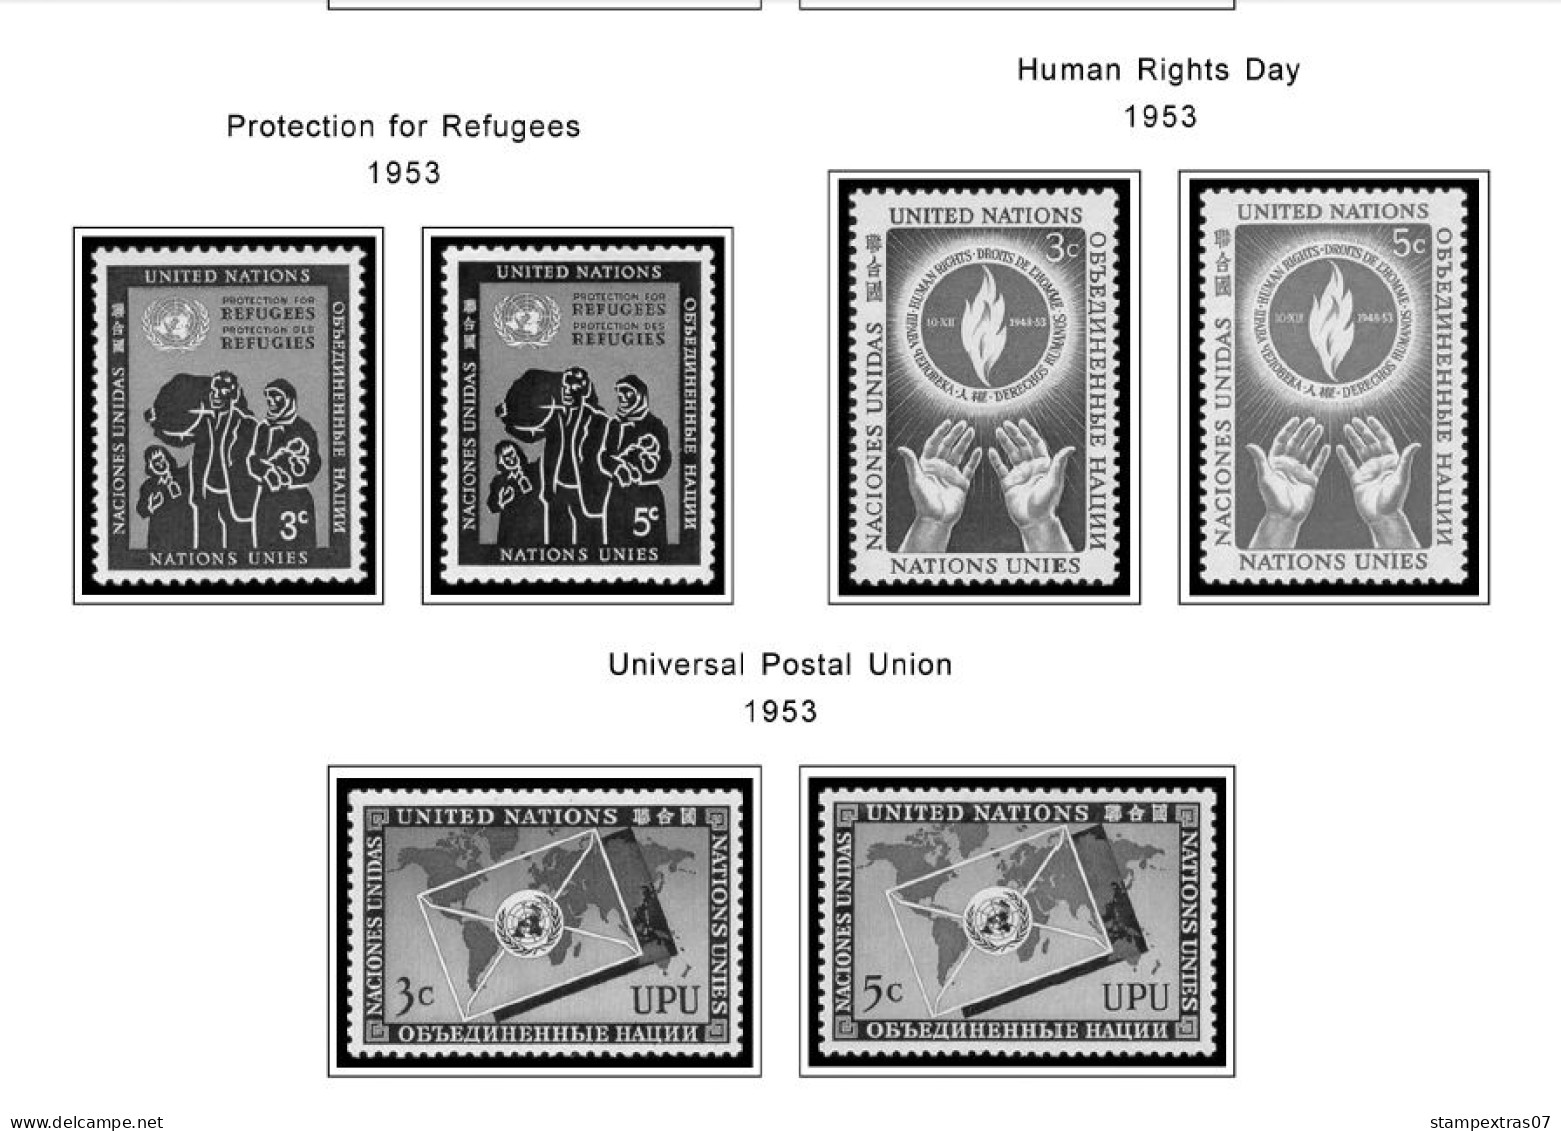 UNITED NATIONS - NEW YORK 1951-2020 STAMP ALBUM PAGES (229 B&w Illustrated Pages) - Englisch